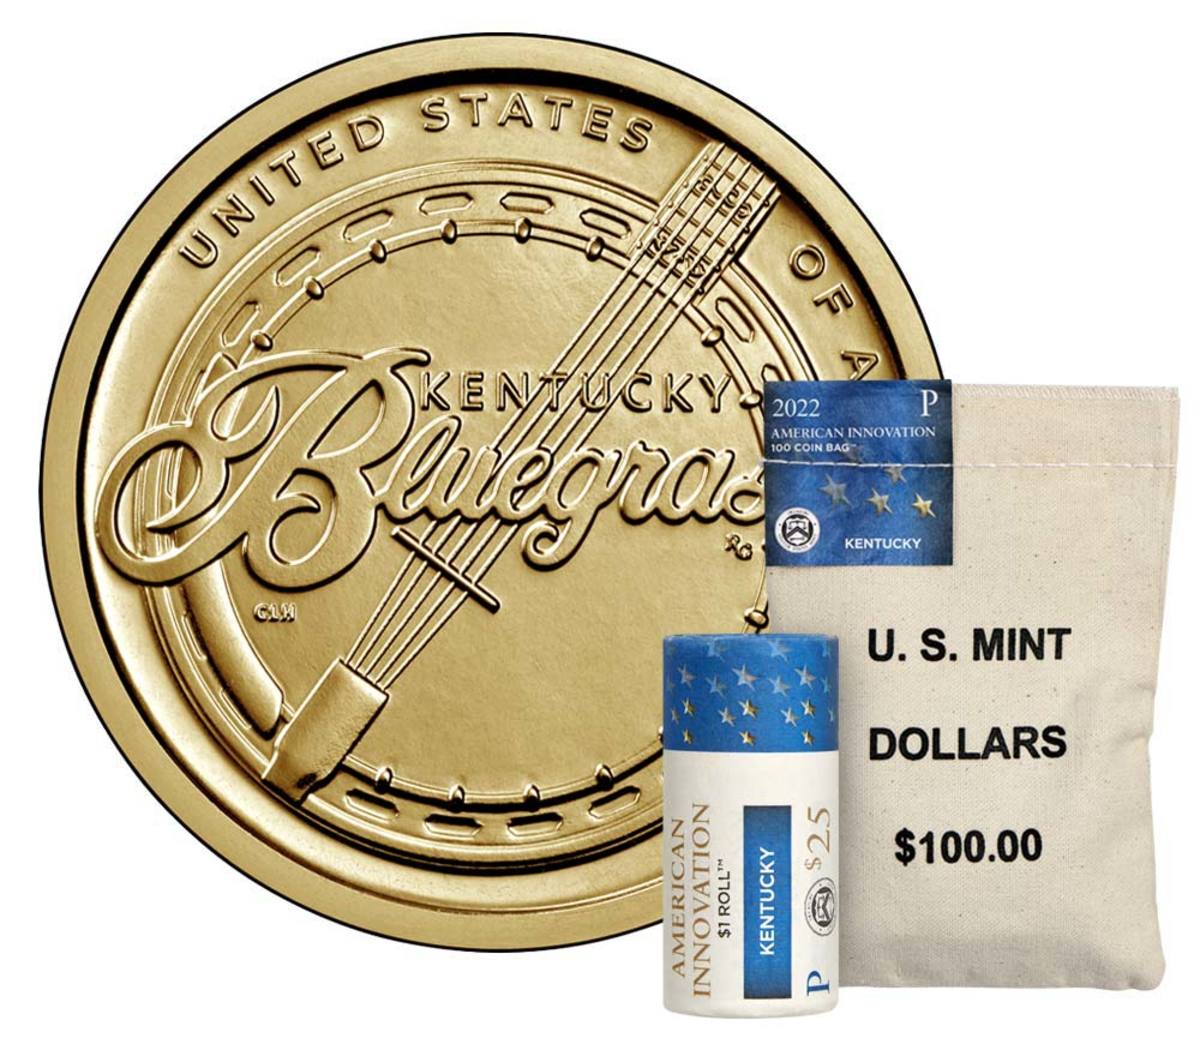 American Innovation dollar for the state of Kentucky. (Image courtesy United States Mint.)